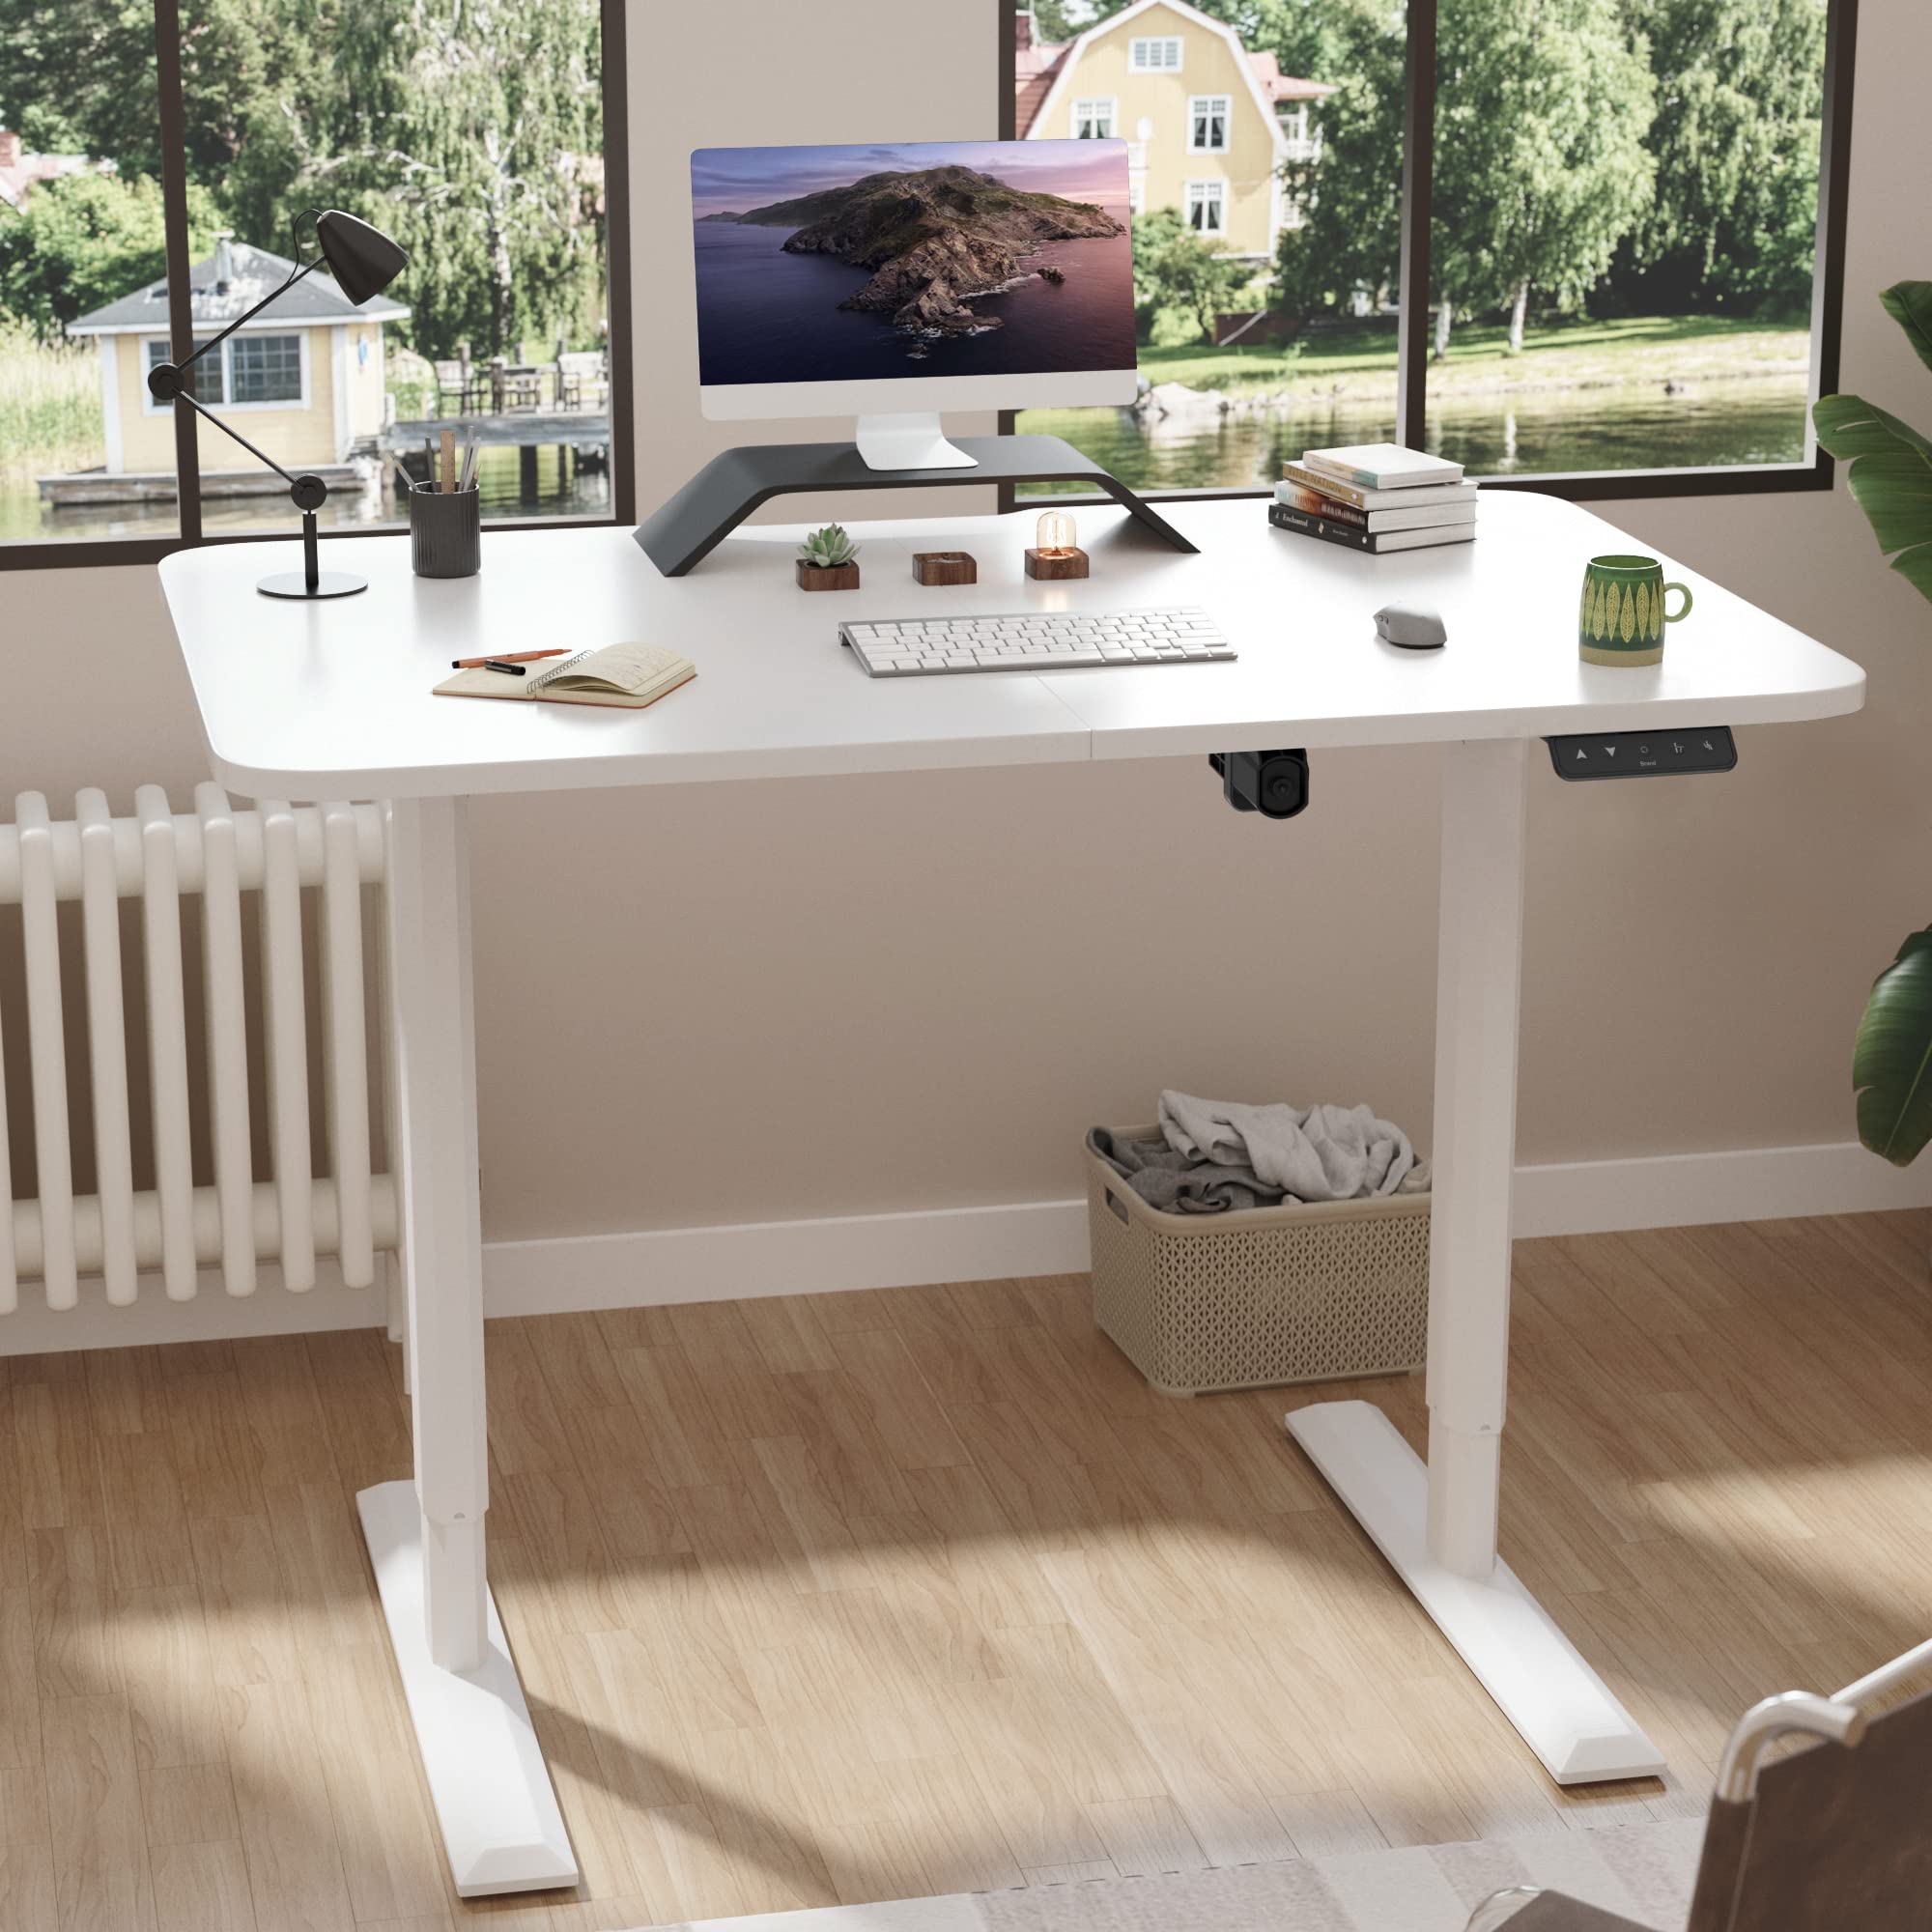 JUMMICO Standing Desk Electric Adjustable Desk Large 44 x 24 Sit Stand Up Desk Home Office Computer Desk Memory Preset with T-Shaped Metal Bracket and Holes for Routing Cables, White